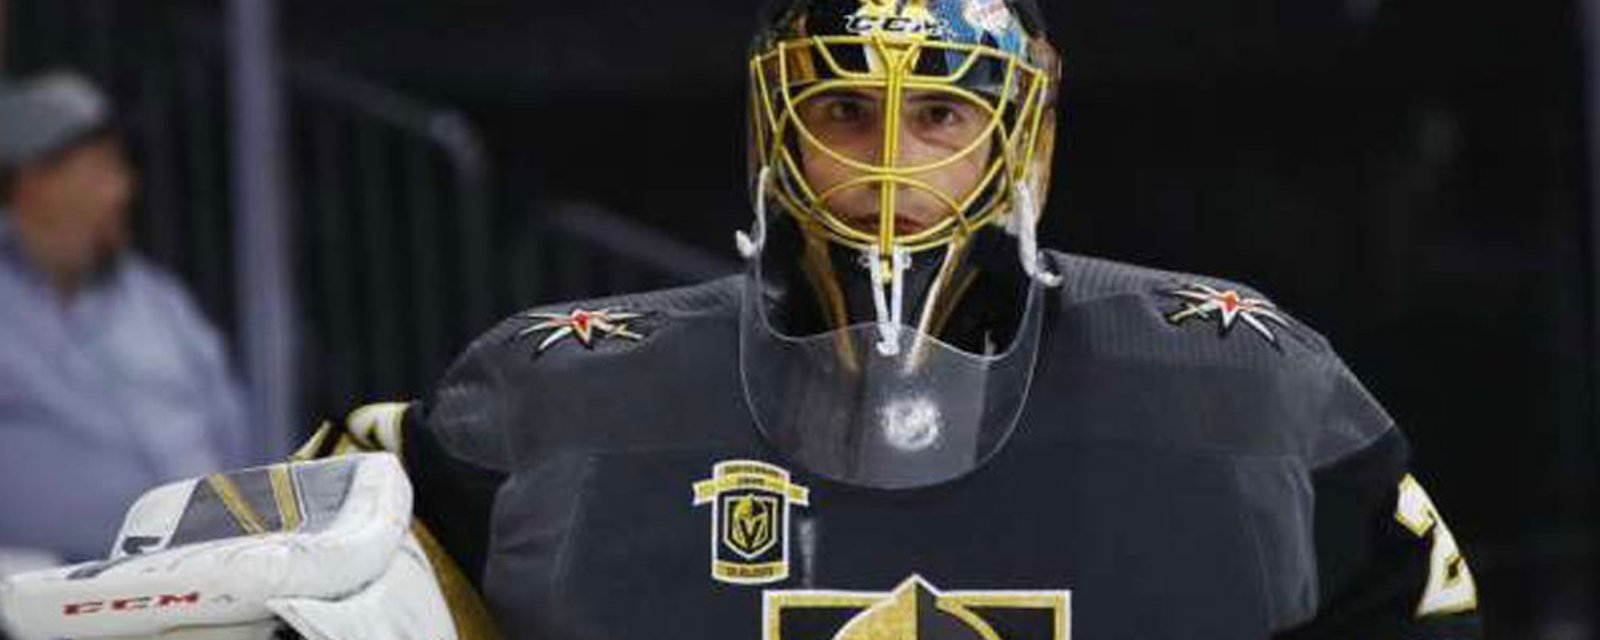 A change of plan might send Fleury packing!